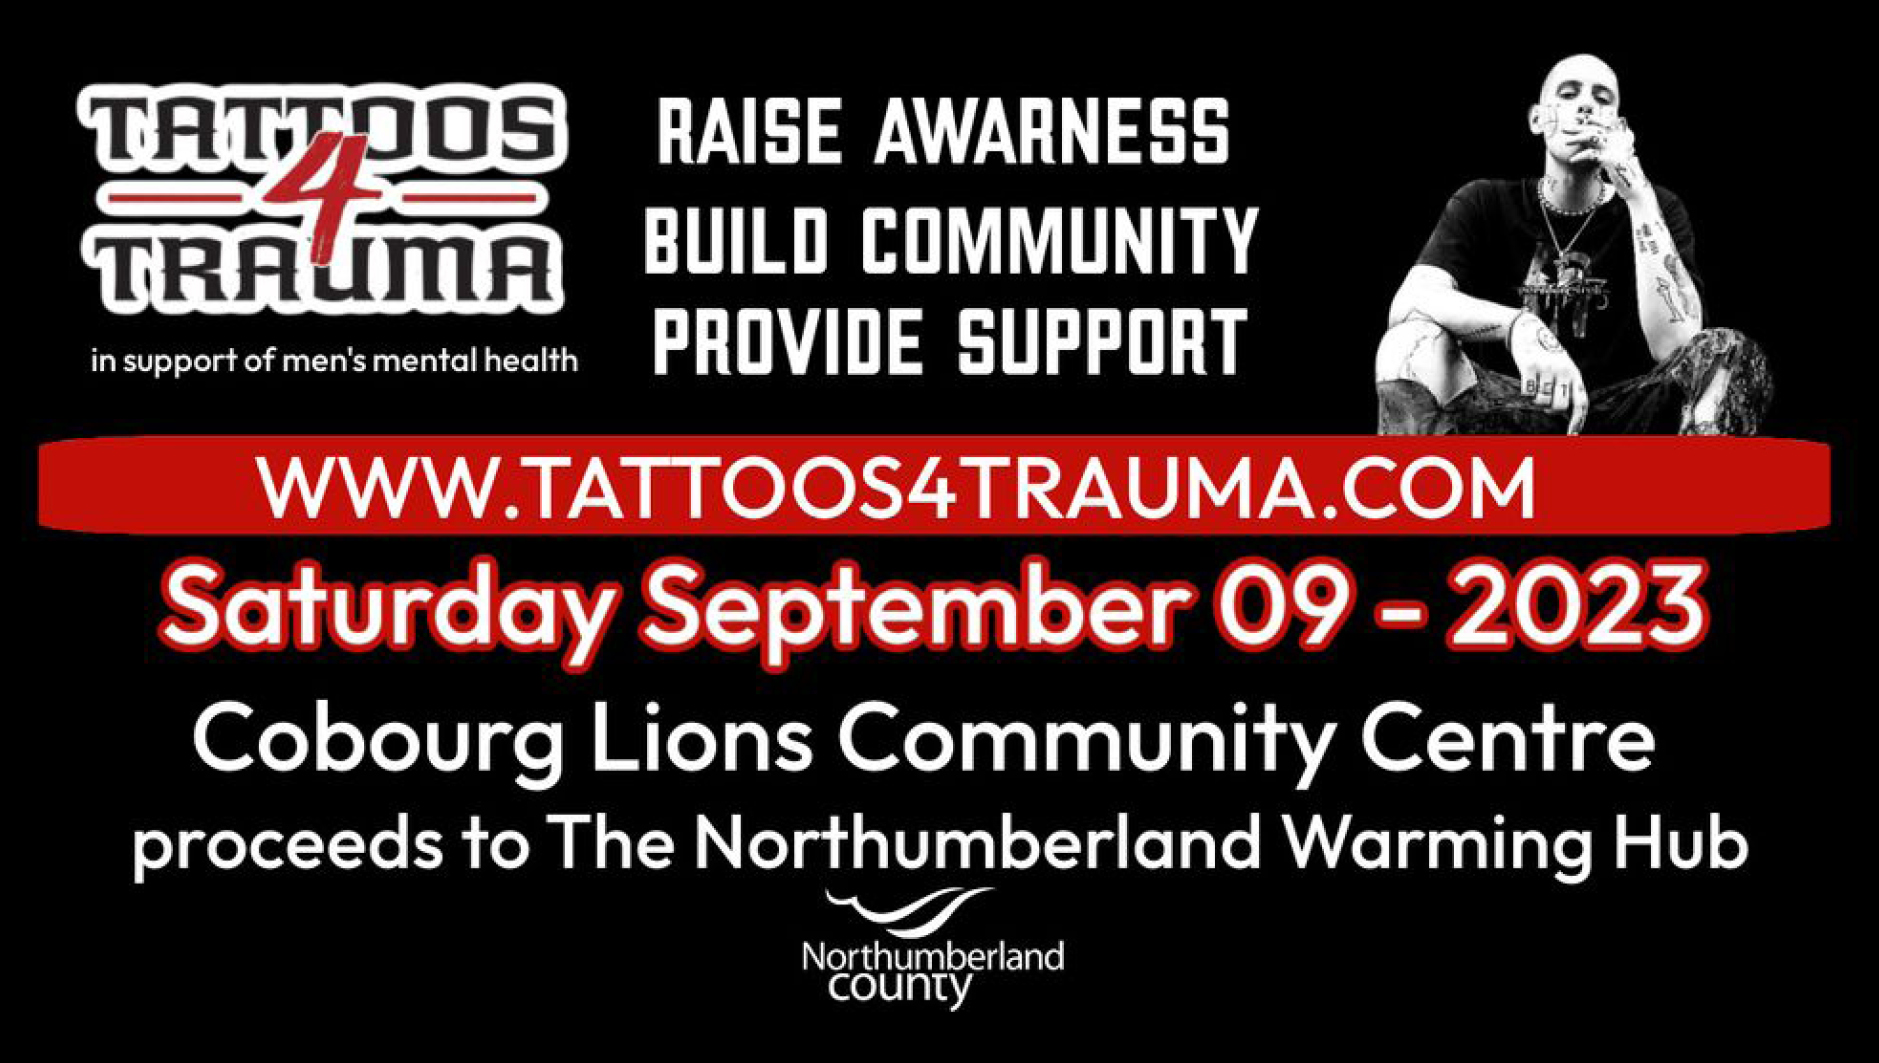 Less Than Two Weeks to Go for Tattoos 4 Trauma 2023!